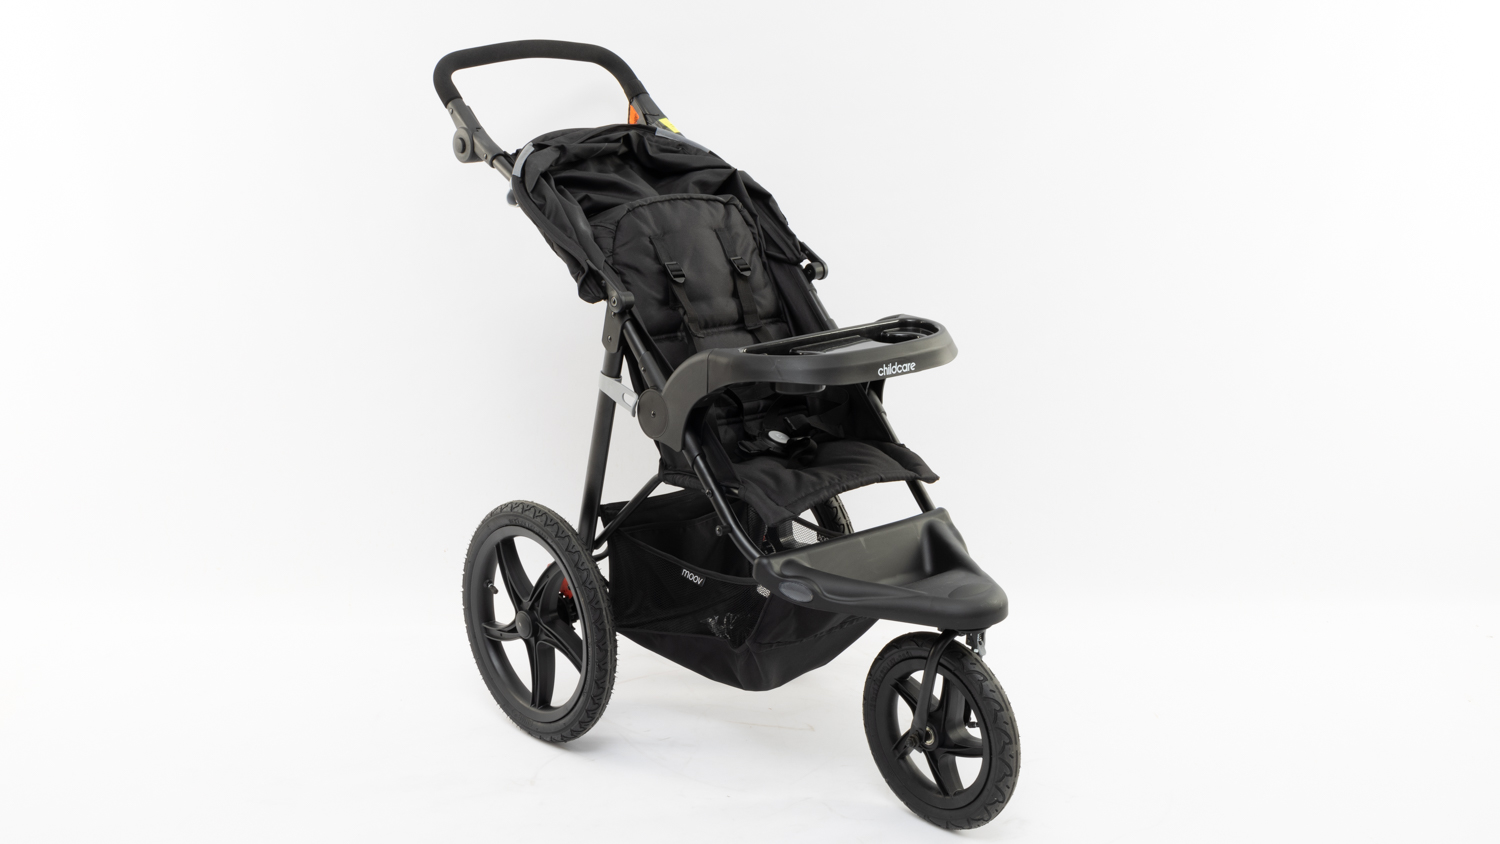 Childcare Moov Jogger Review | Pram and stroller | CHOICE